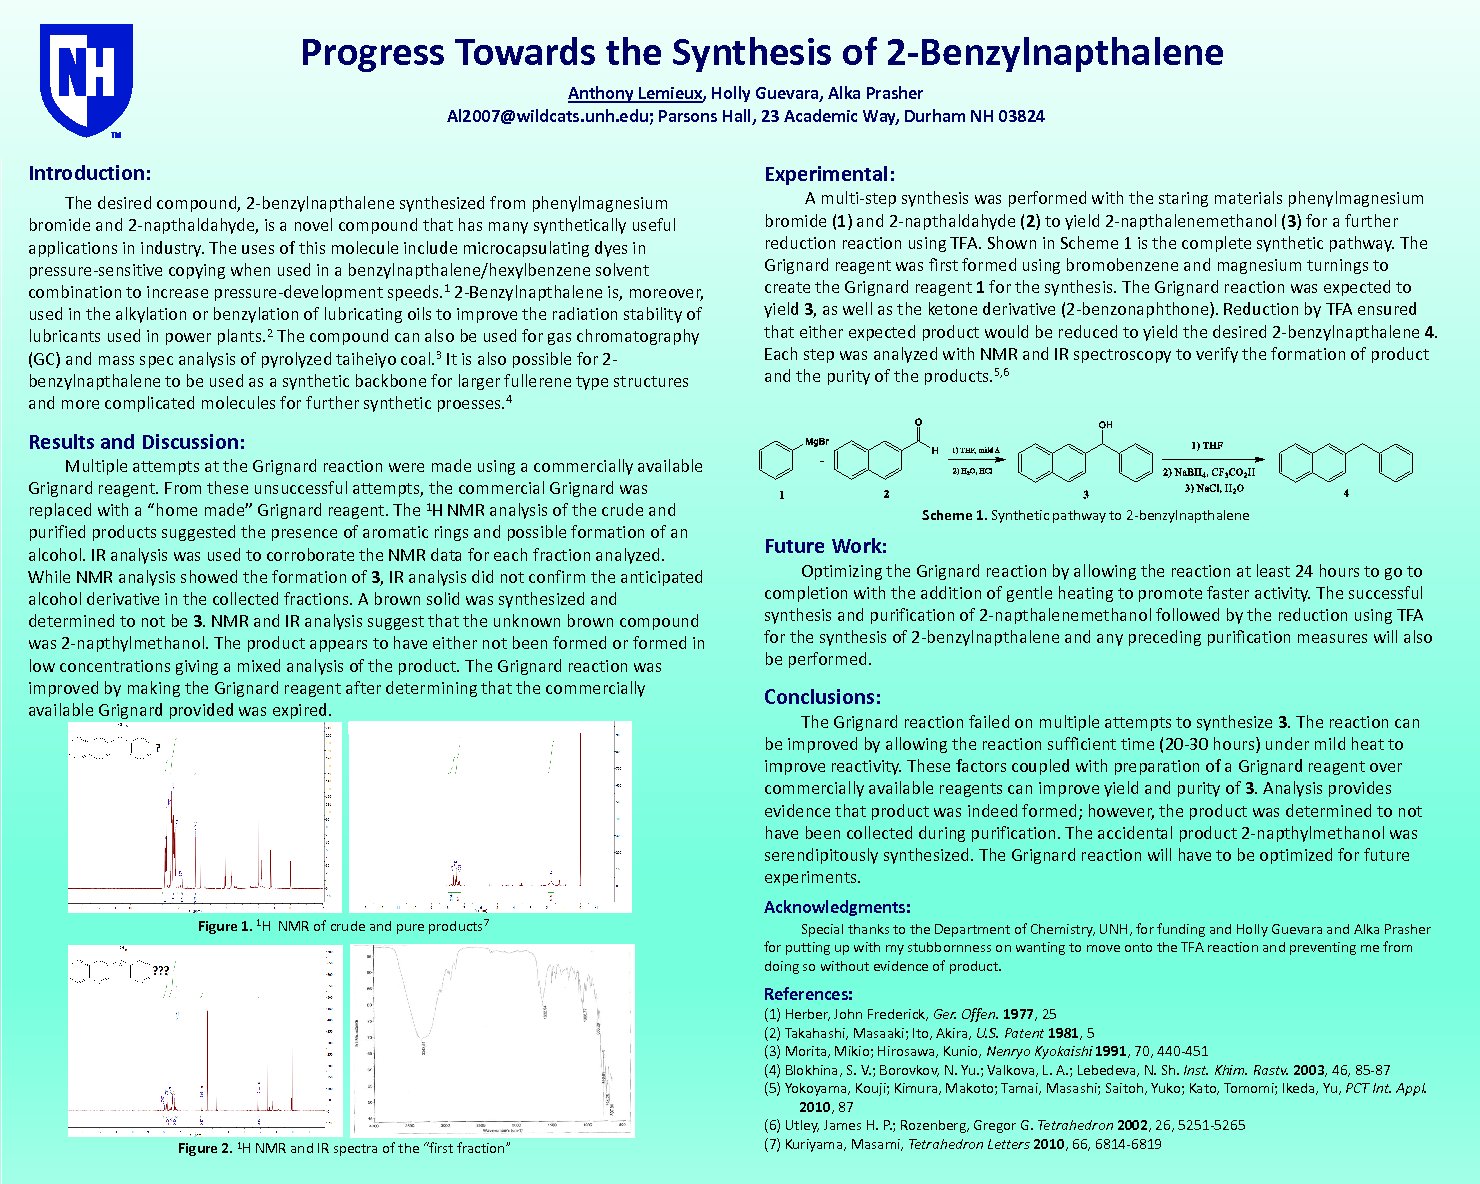 Progress Towards The Synthesis Of 2-Benzylnapthalene by Al2007